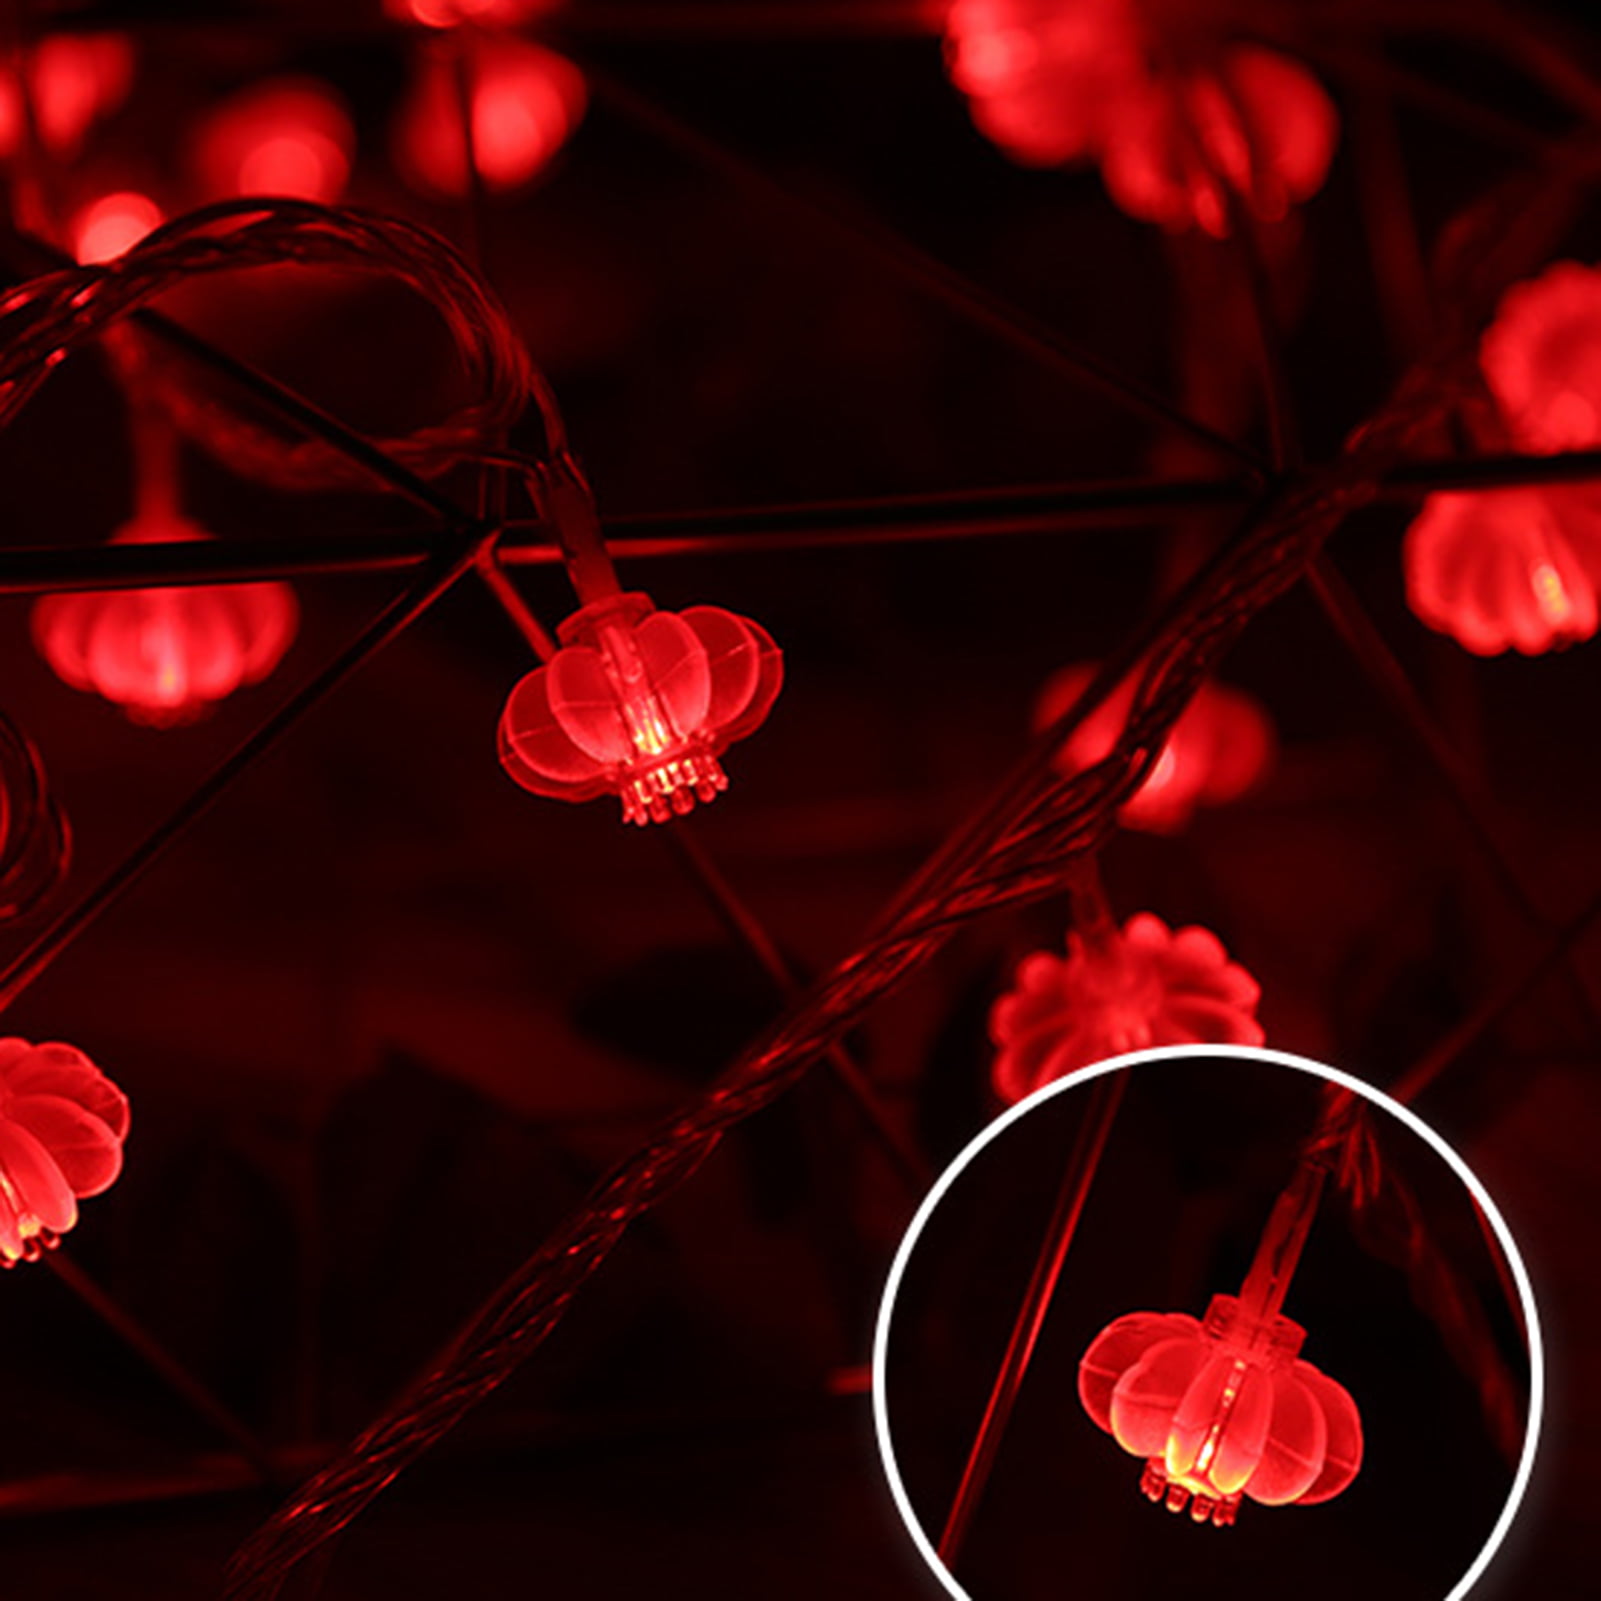 Party Decor String Chinese Knot Lamp LED String Lights Red Lantern Battery